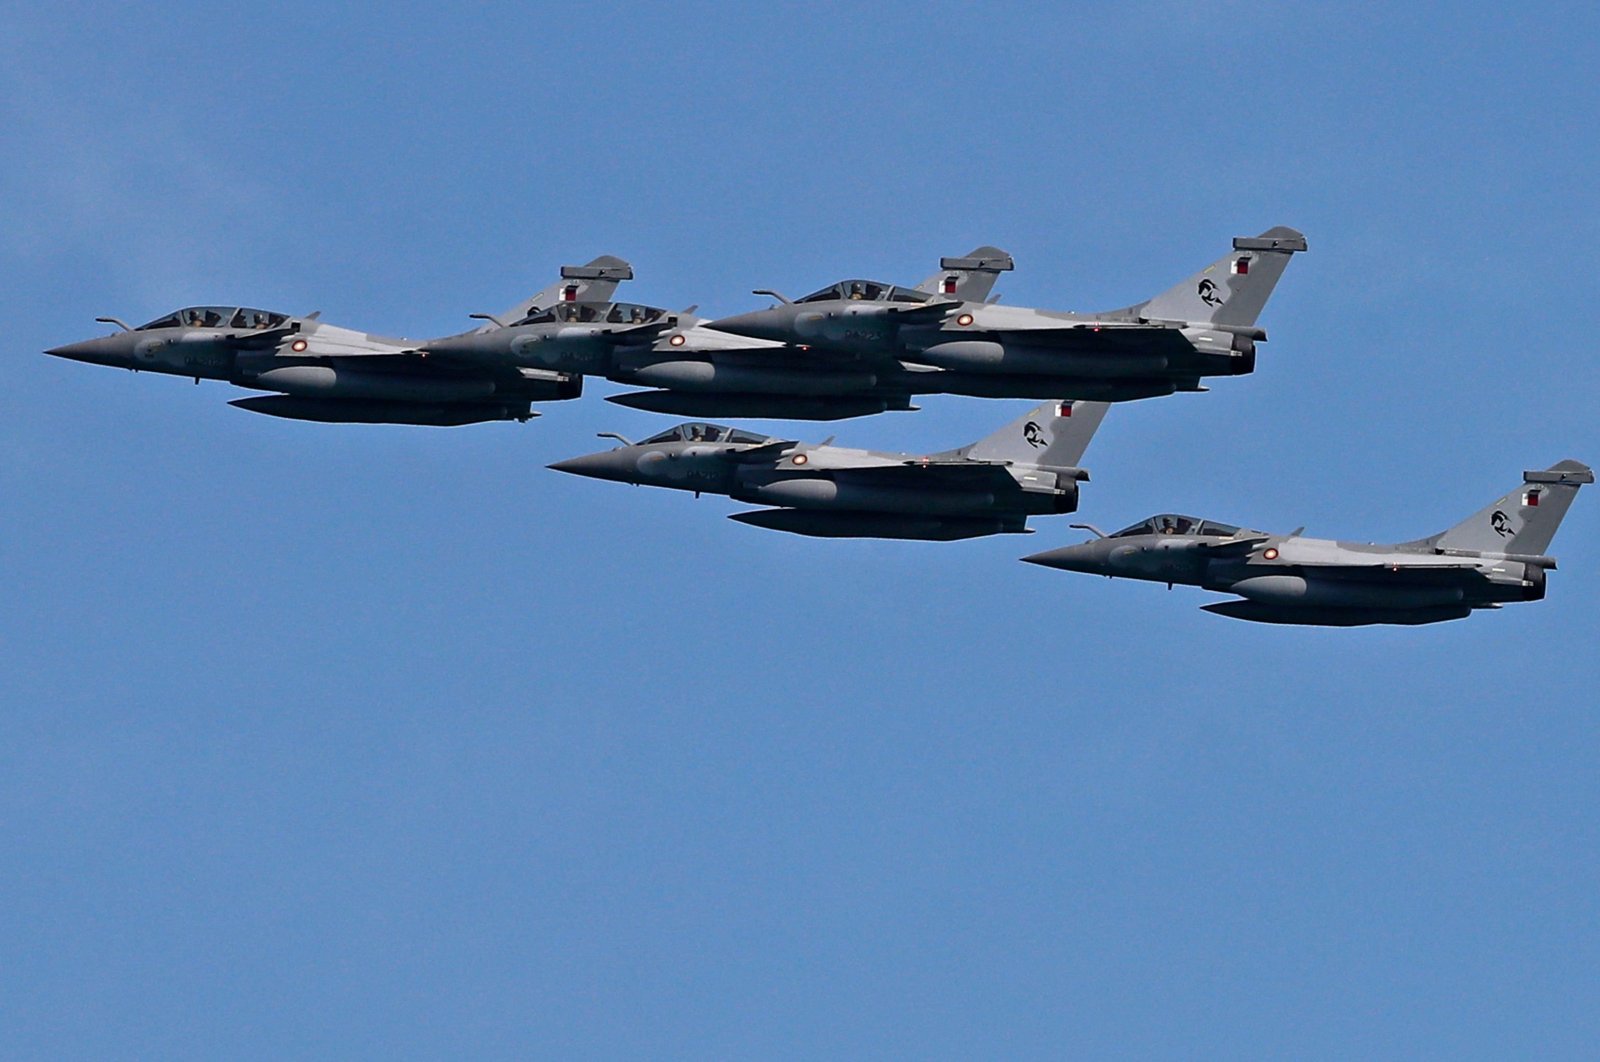 French-made Rafale fighter aircraft of the Qatar Air Force fly in formation during a military parade to mark Qatar's national day celebration, in the capital Doha, Dec. 18, 2020. (AFP)